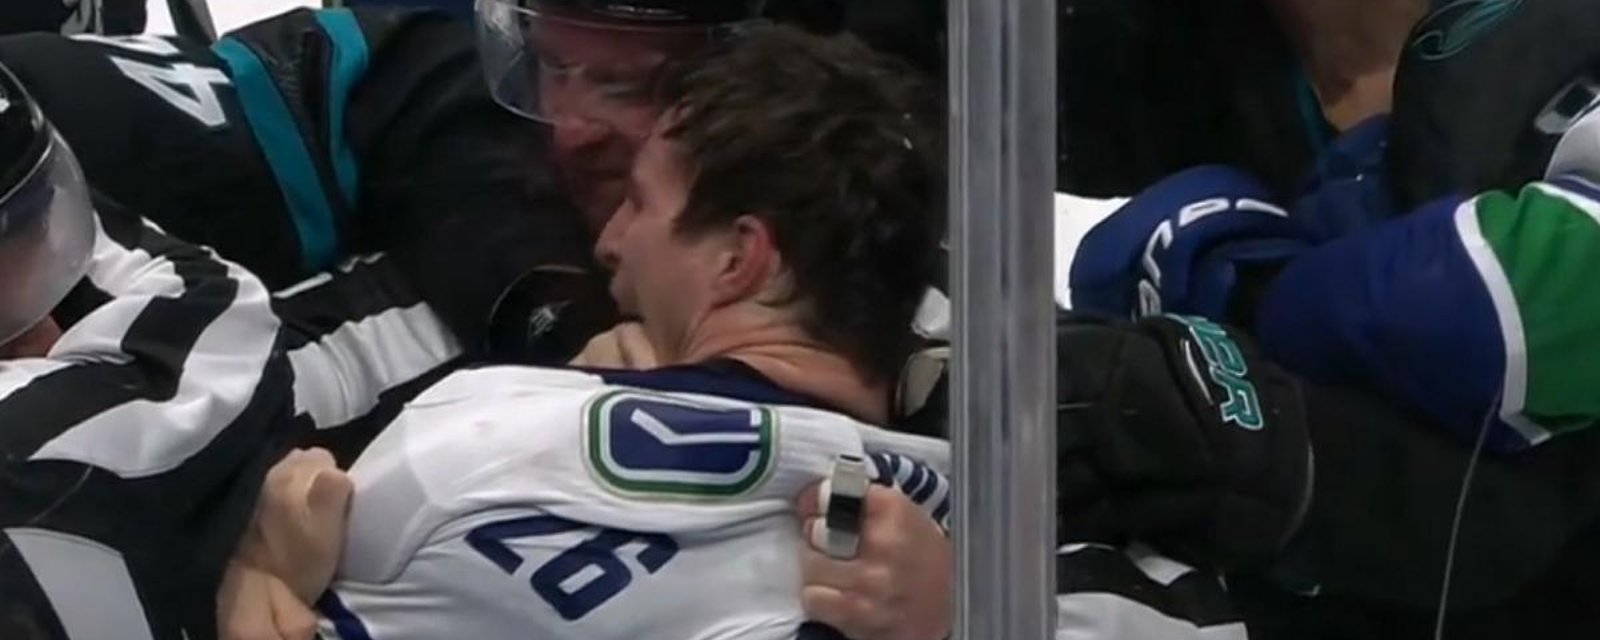 New camera angle shows NHL agitator clearly biting his opponent.